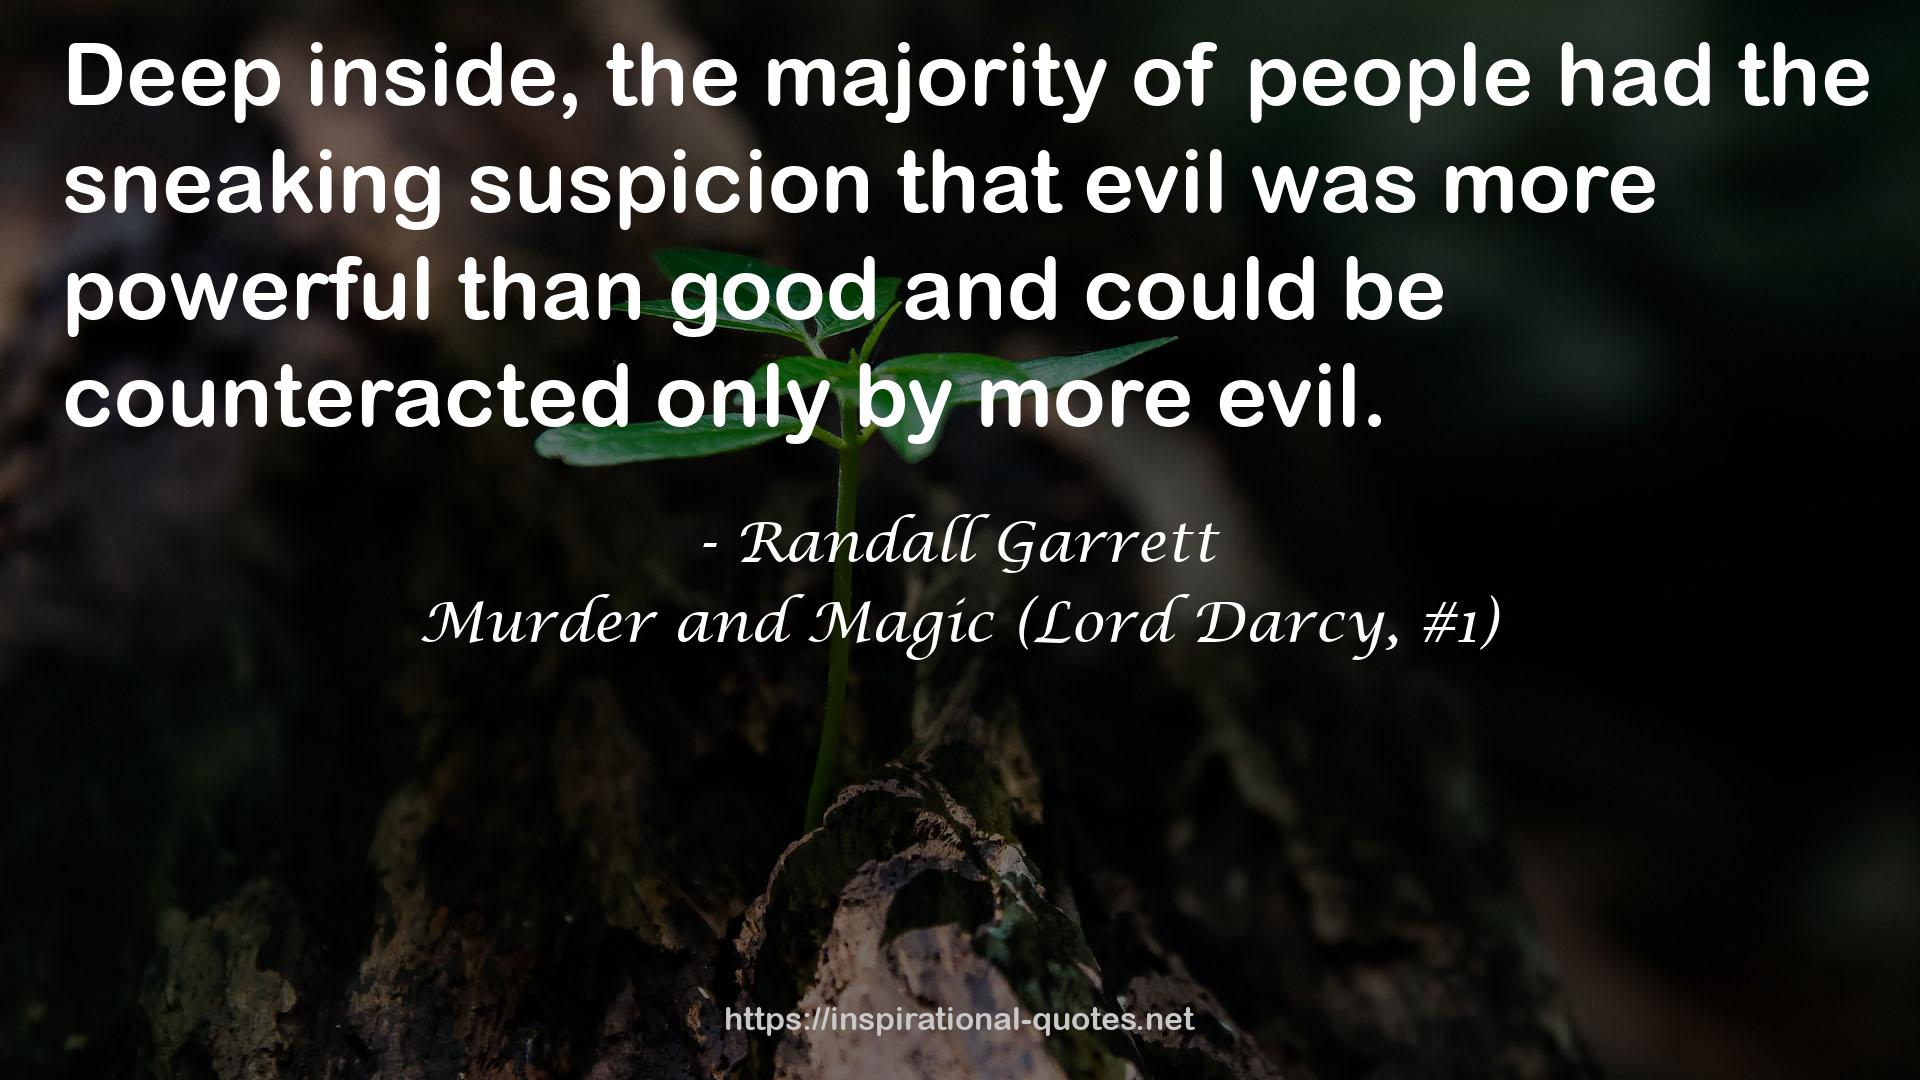 Murder and Magic (Lord Darcy, #1) QUOTES